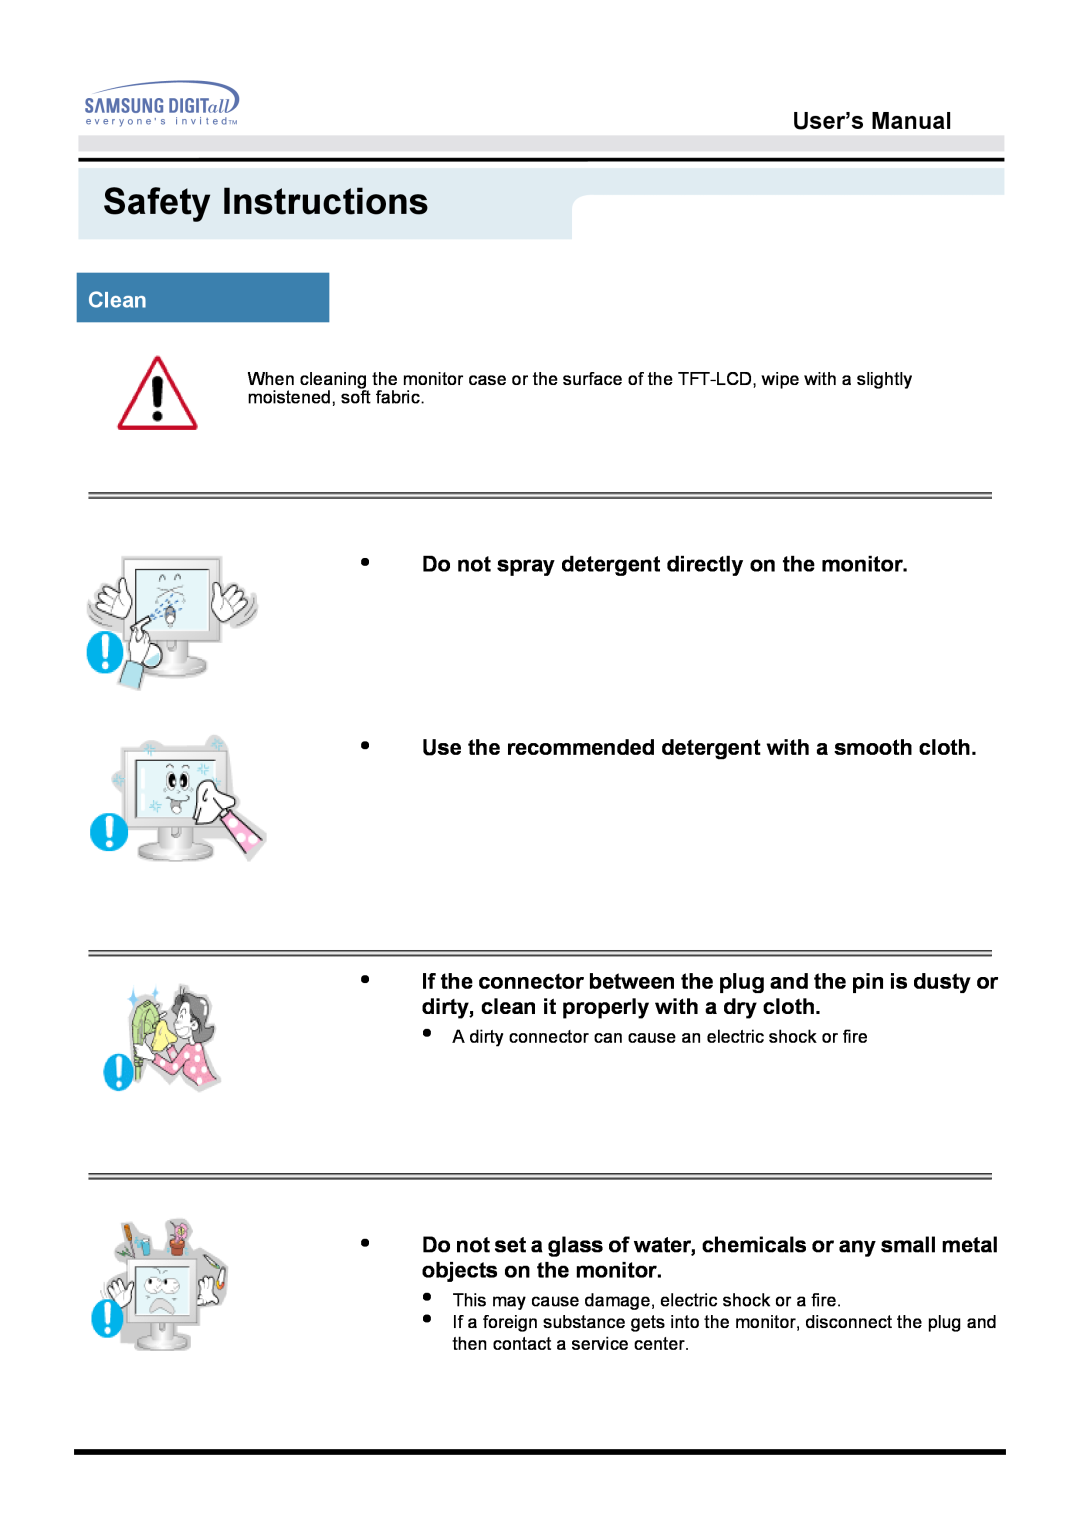 Samsung 171Q manual Clean, Safety Instructions, User’s Manual, Do not spray detergent directly on the monitor 